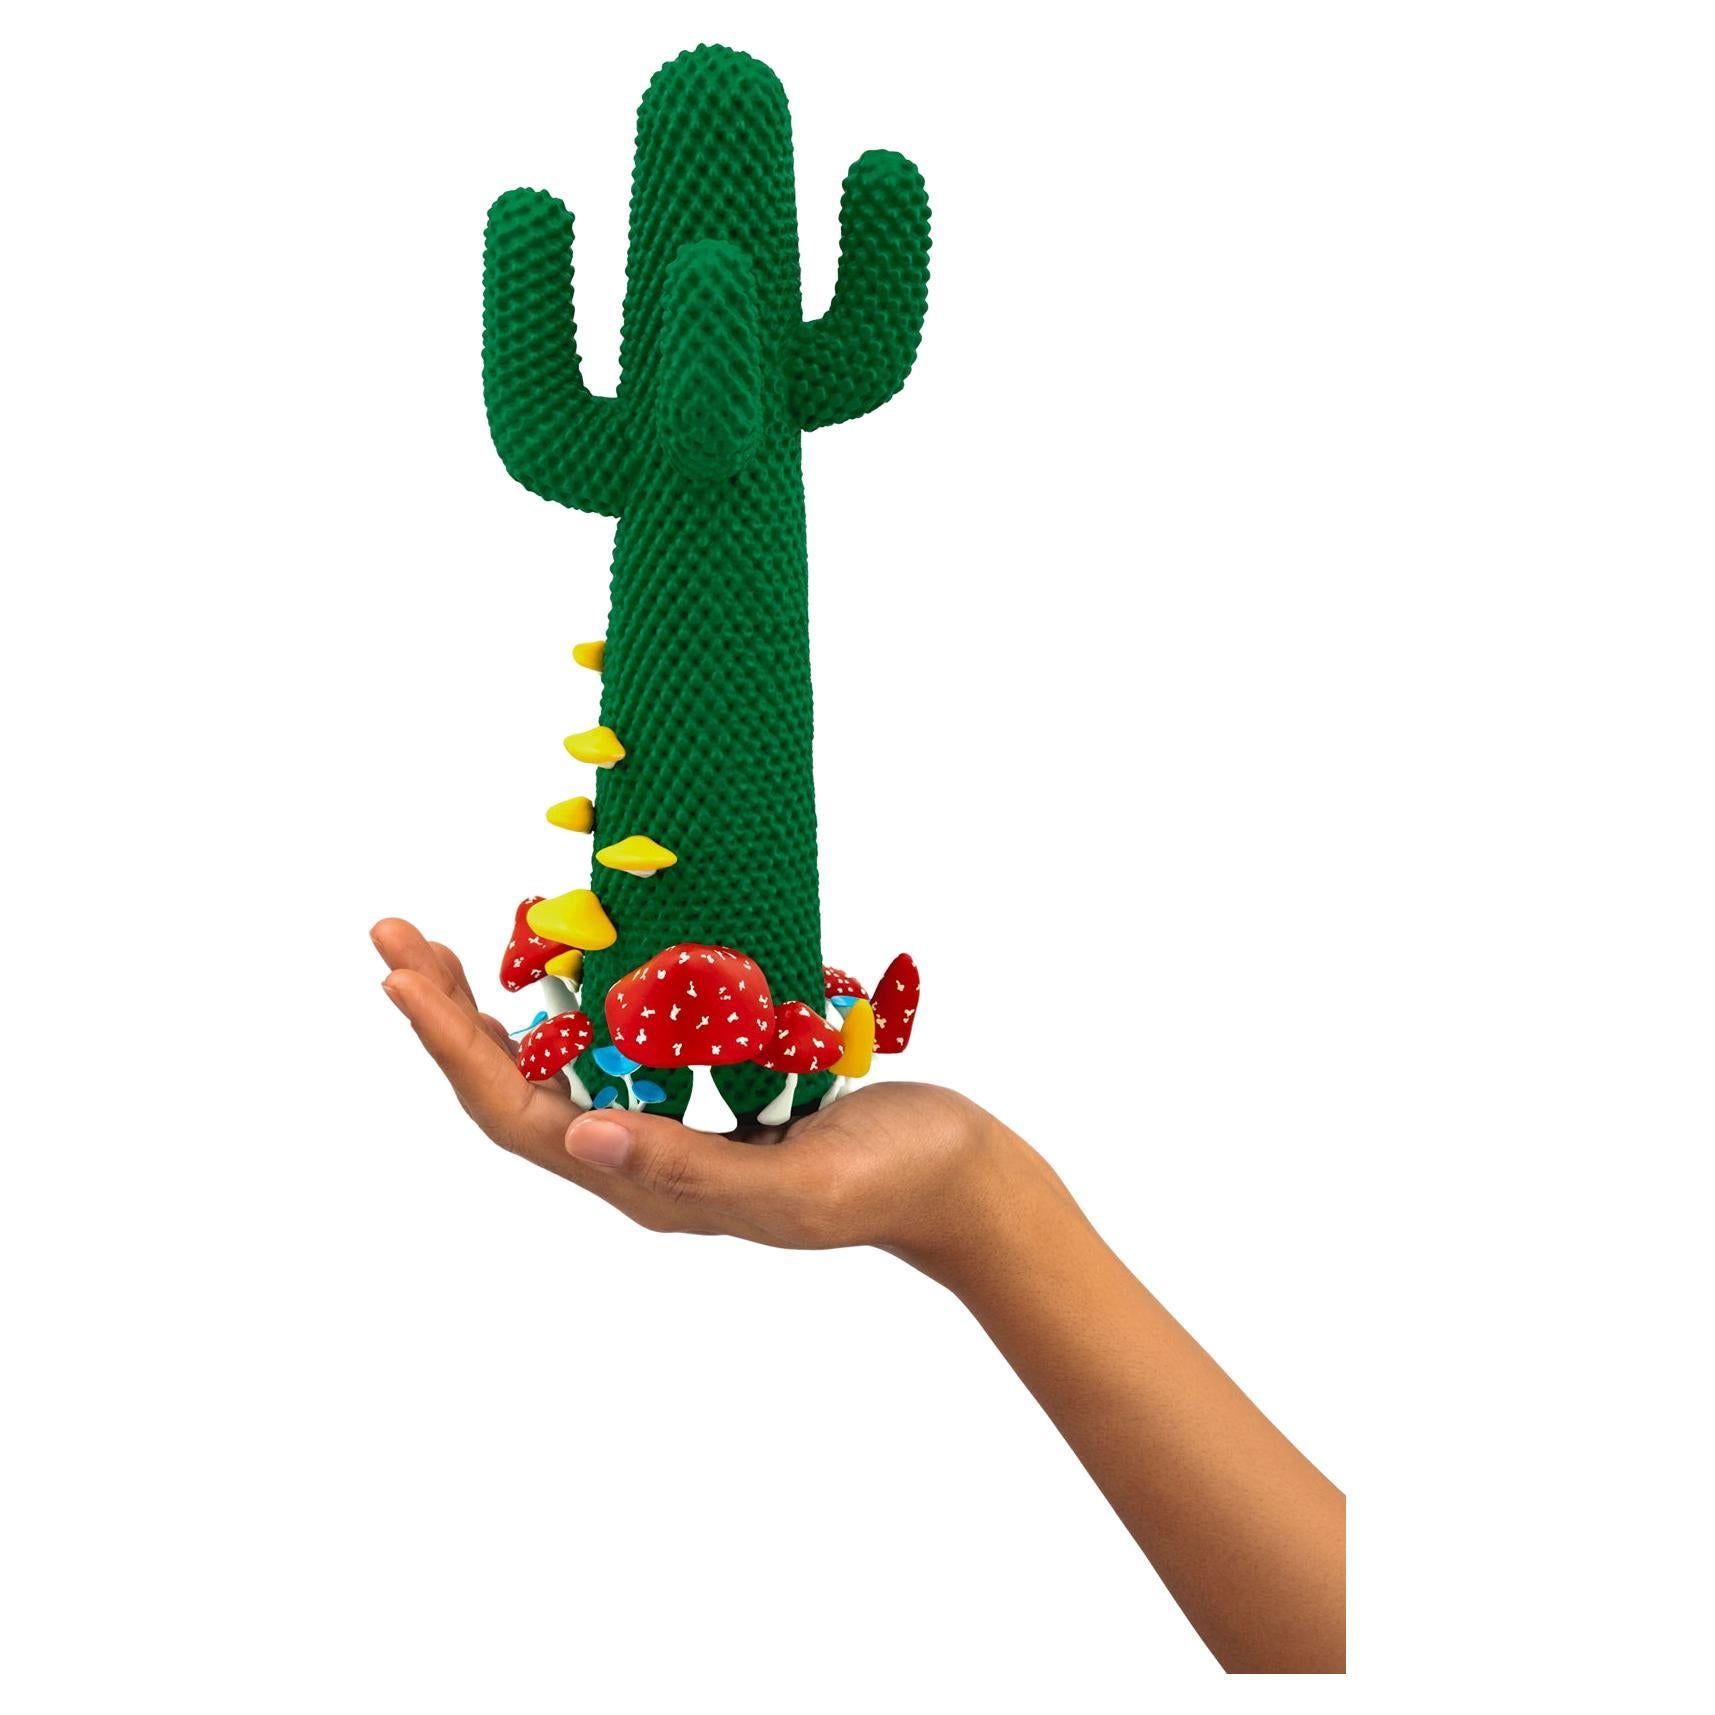 Limited Edition #56/99

Gufram presents the miniaturised version of the Shroom CACTUS® created in collaboration with A$AP Rocky and the artist’s new design studio HOMMEMADE Exactly as the real-Size Shroom CACTUS®, the new Guframini piece features